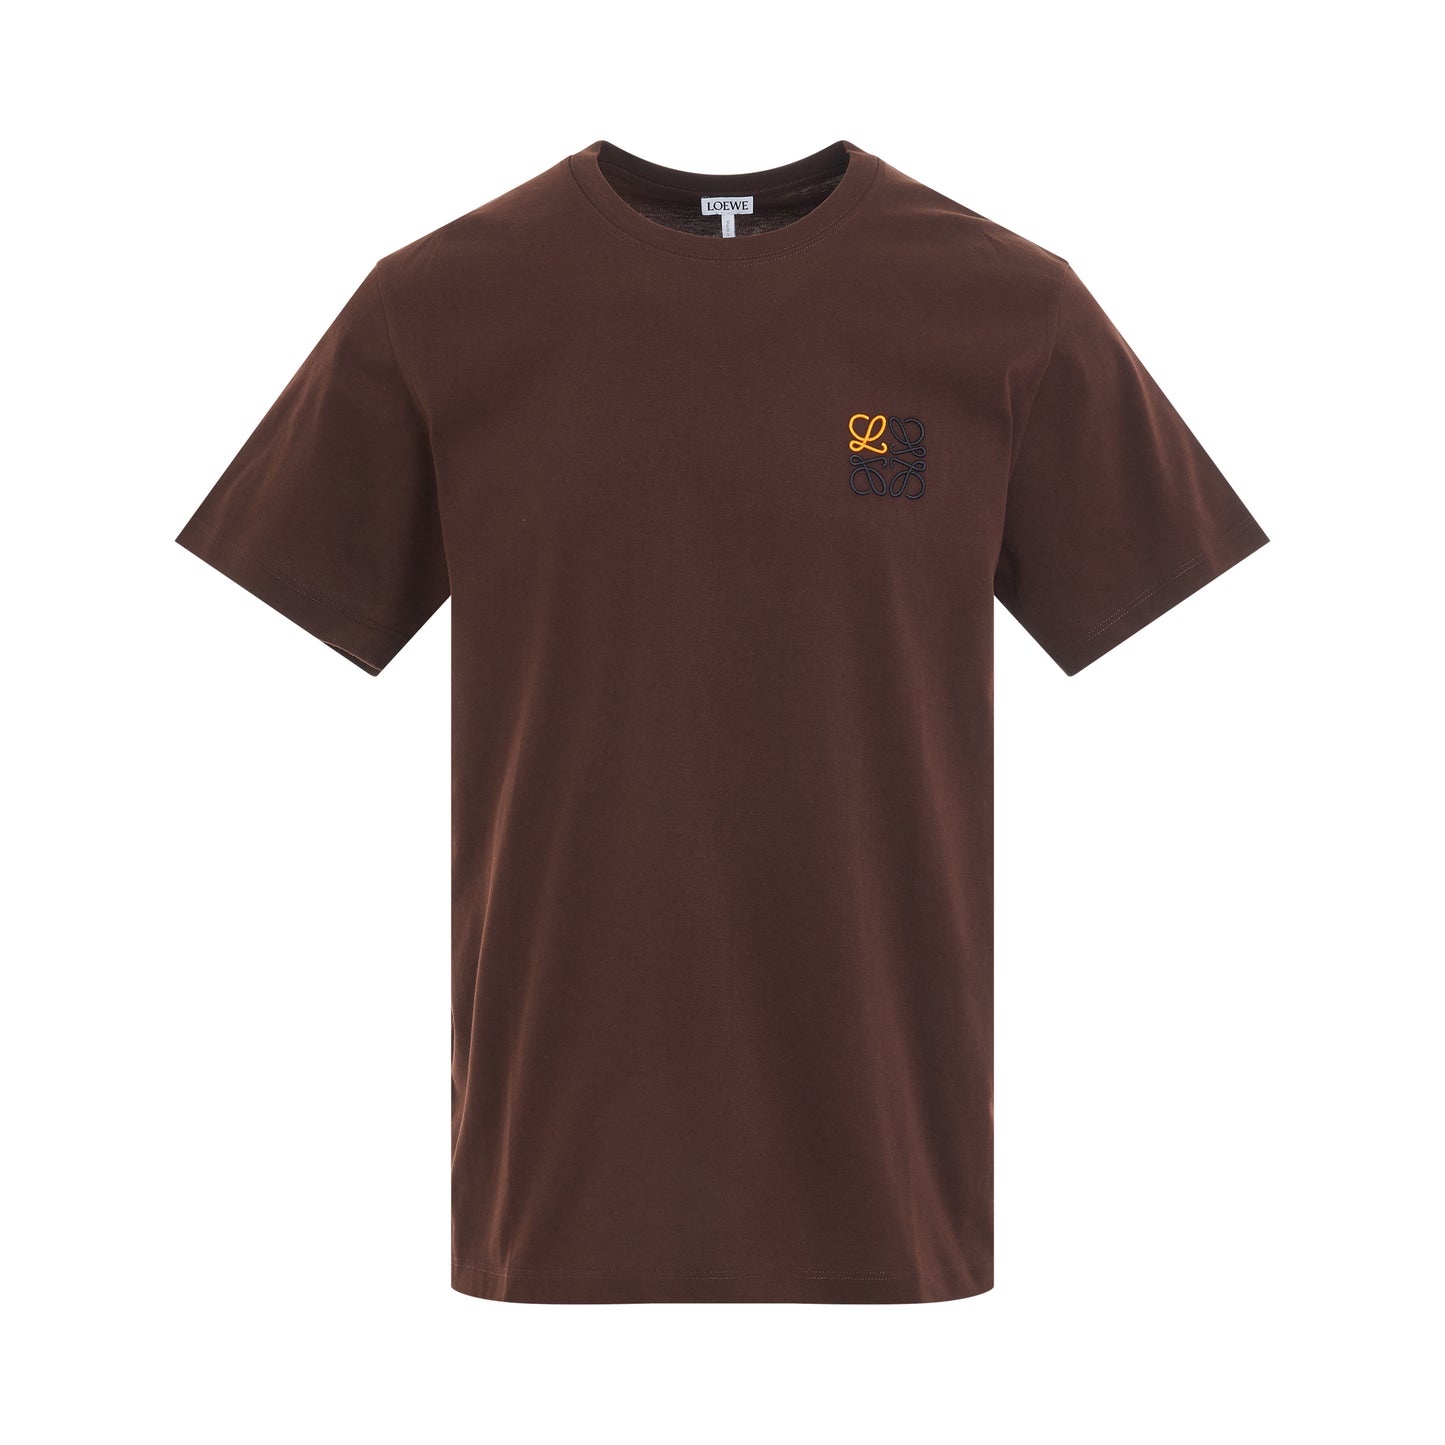 Anagram Logo T-Shirt in Chocolate Brown